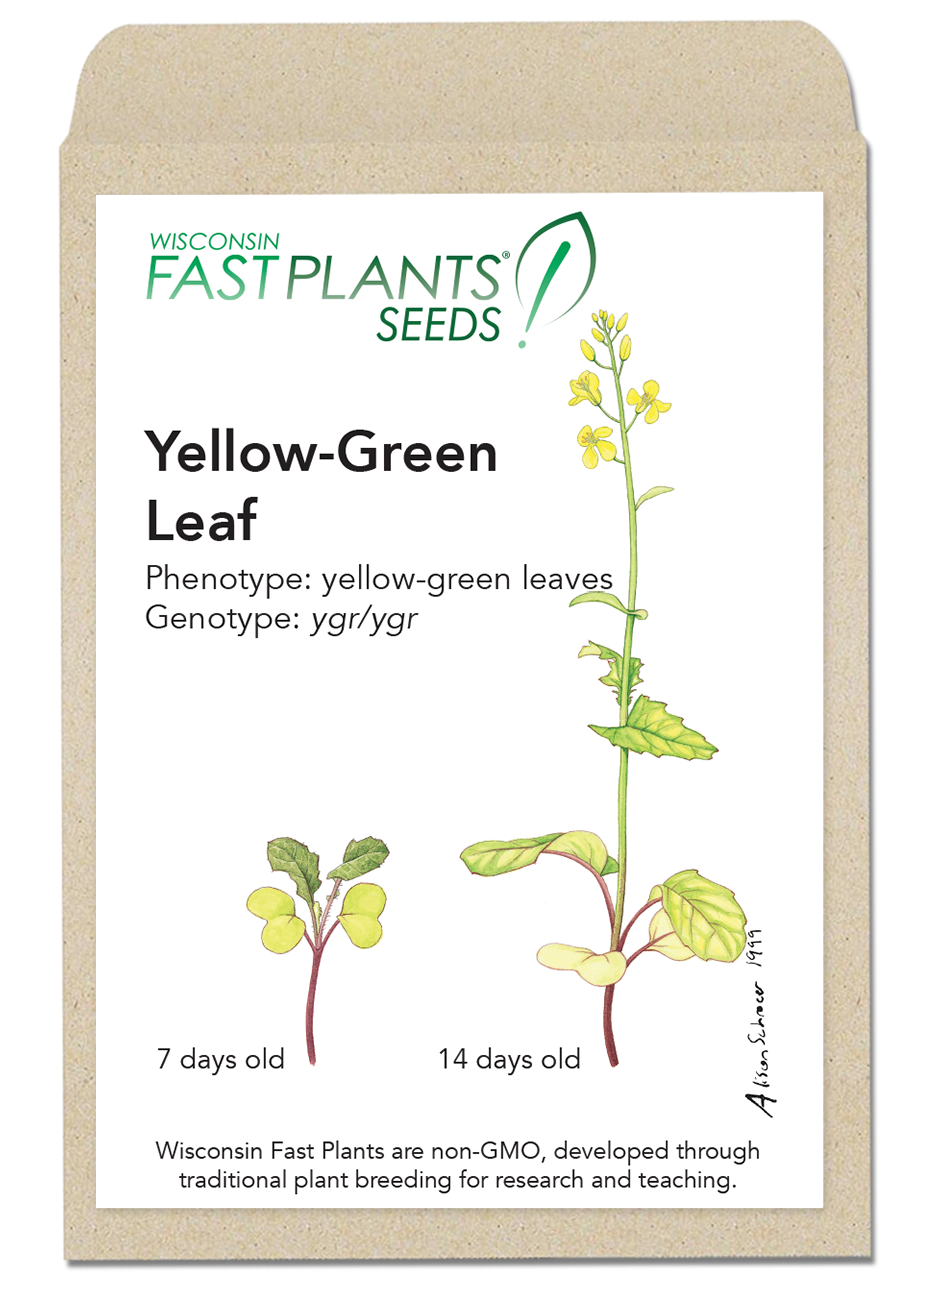 Yellow-Green Leaf Fast Plants seed packet